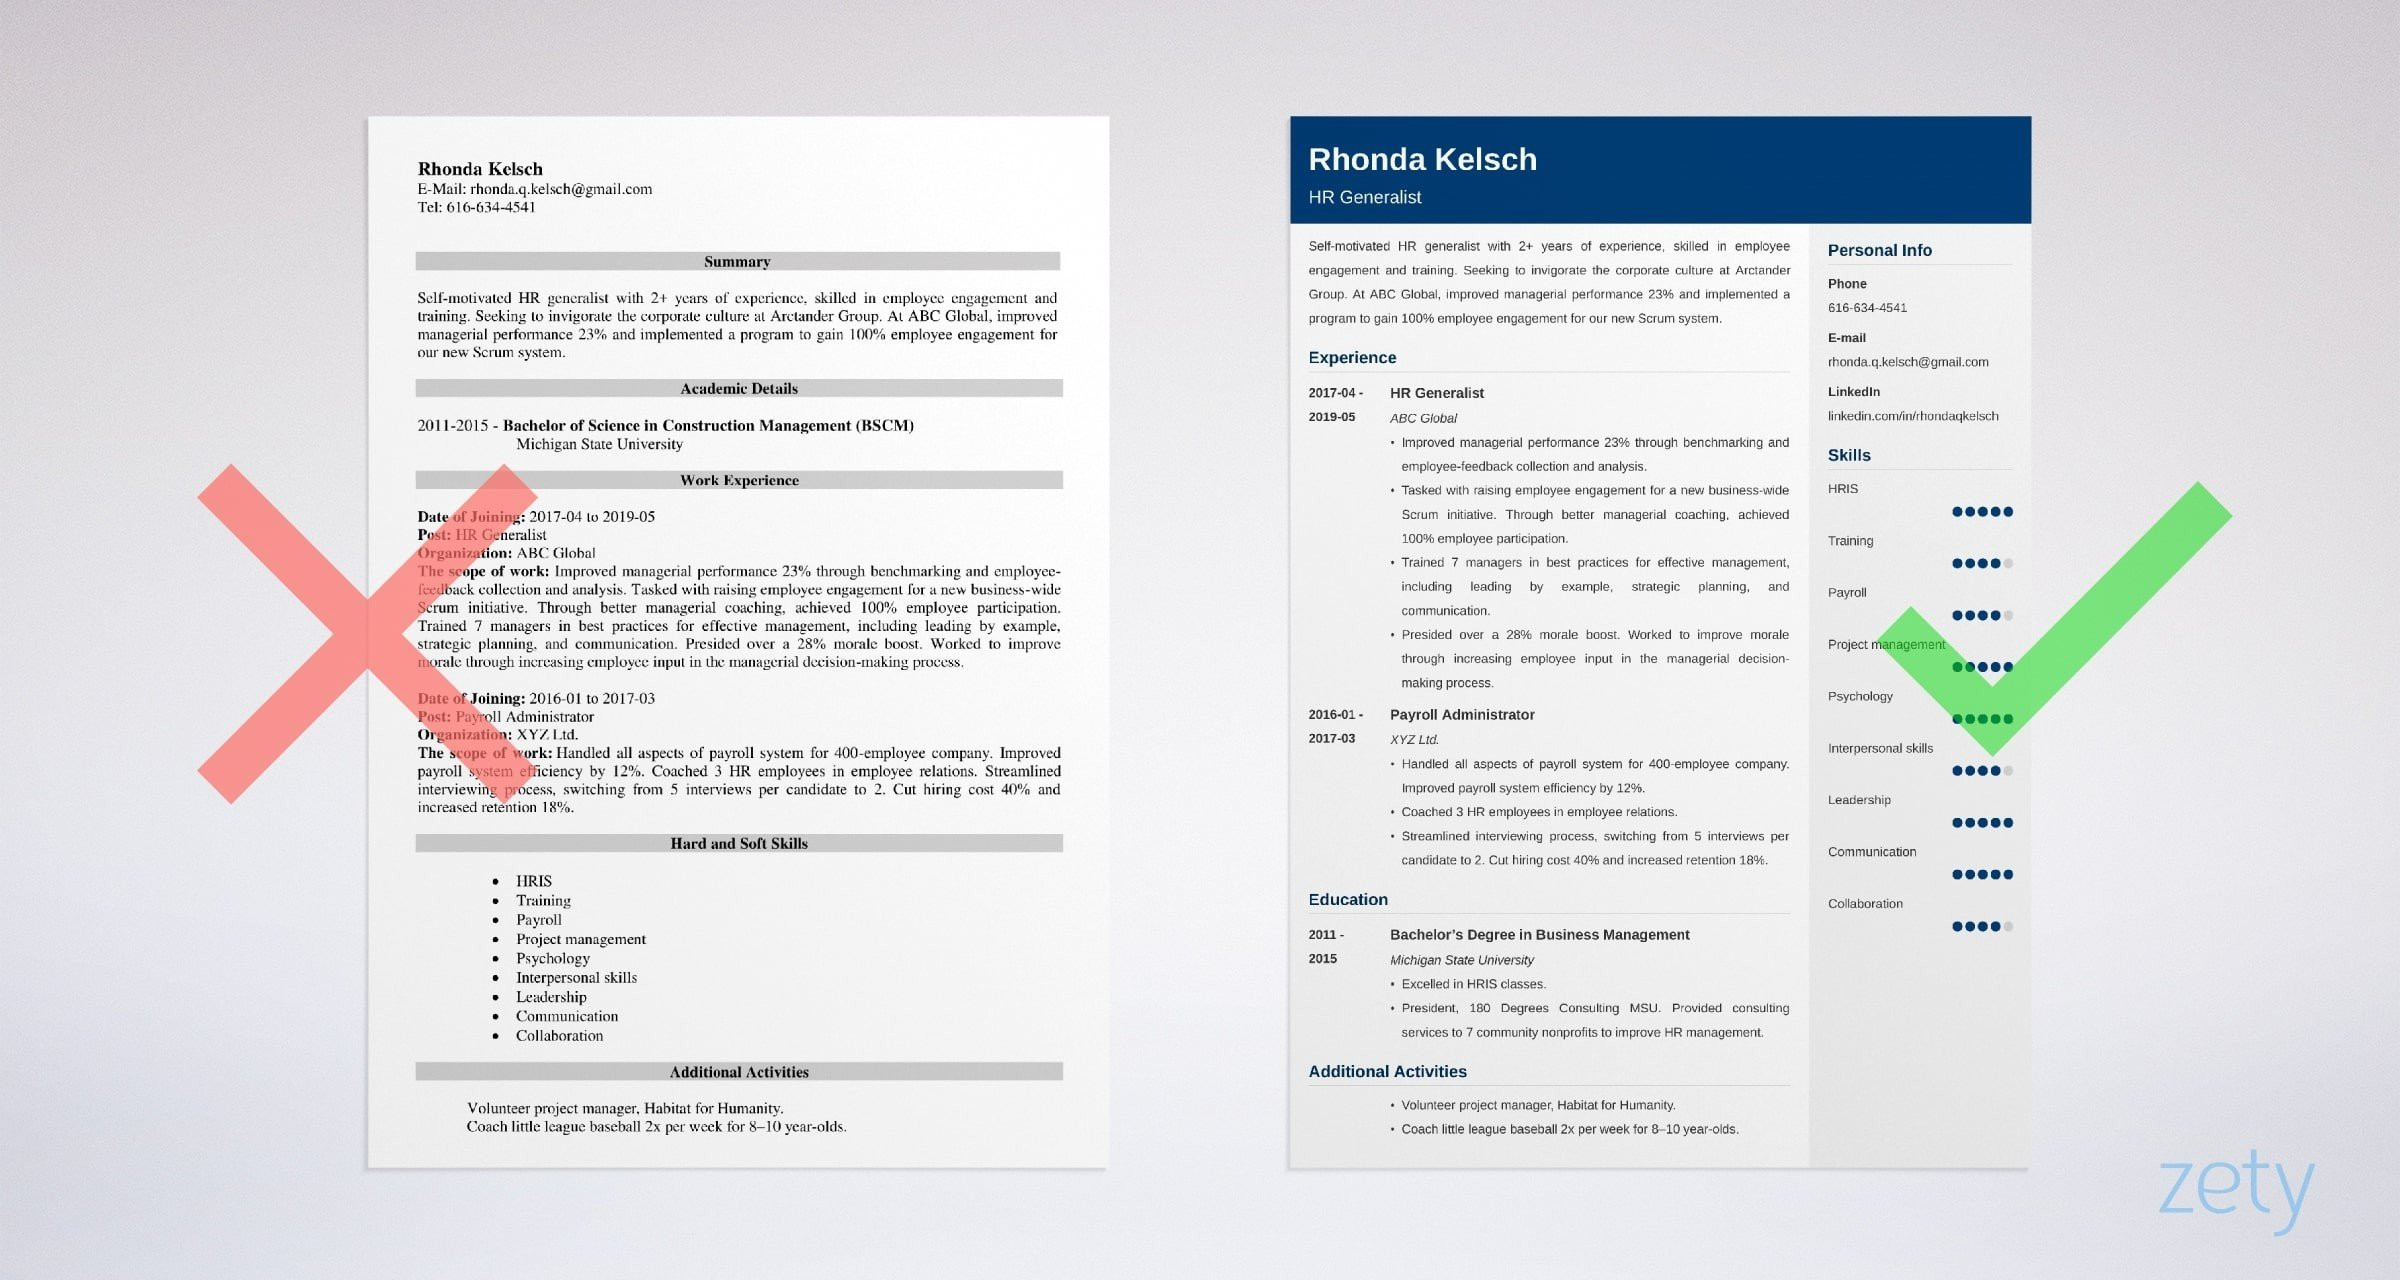 Hr Resume Sample for 10 Years Experience Human Resources (hr) Generalist Resume Samples [20 Tips]